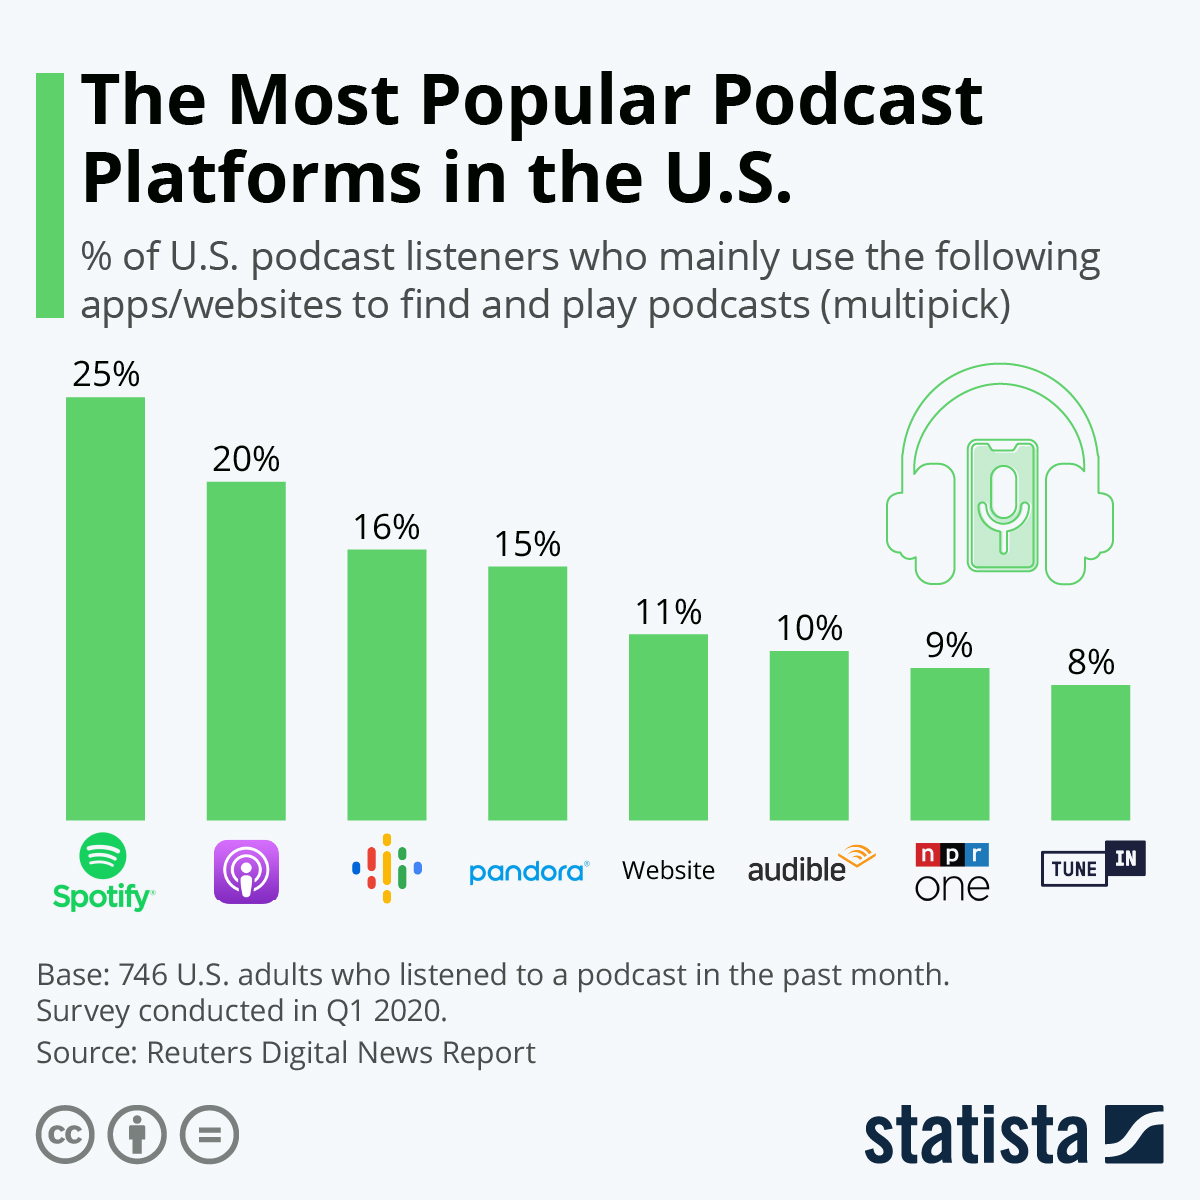 This bar chart displays the top podcast platforms in the U.S., with Spotify leading with 25% market share, followed by Apple Podcasts and Google Podcasts at 20% and 16% respectively.